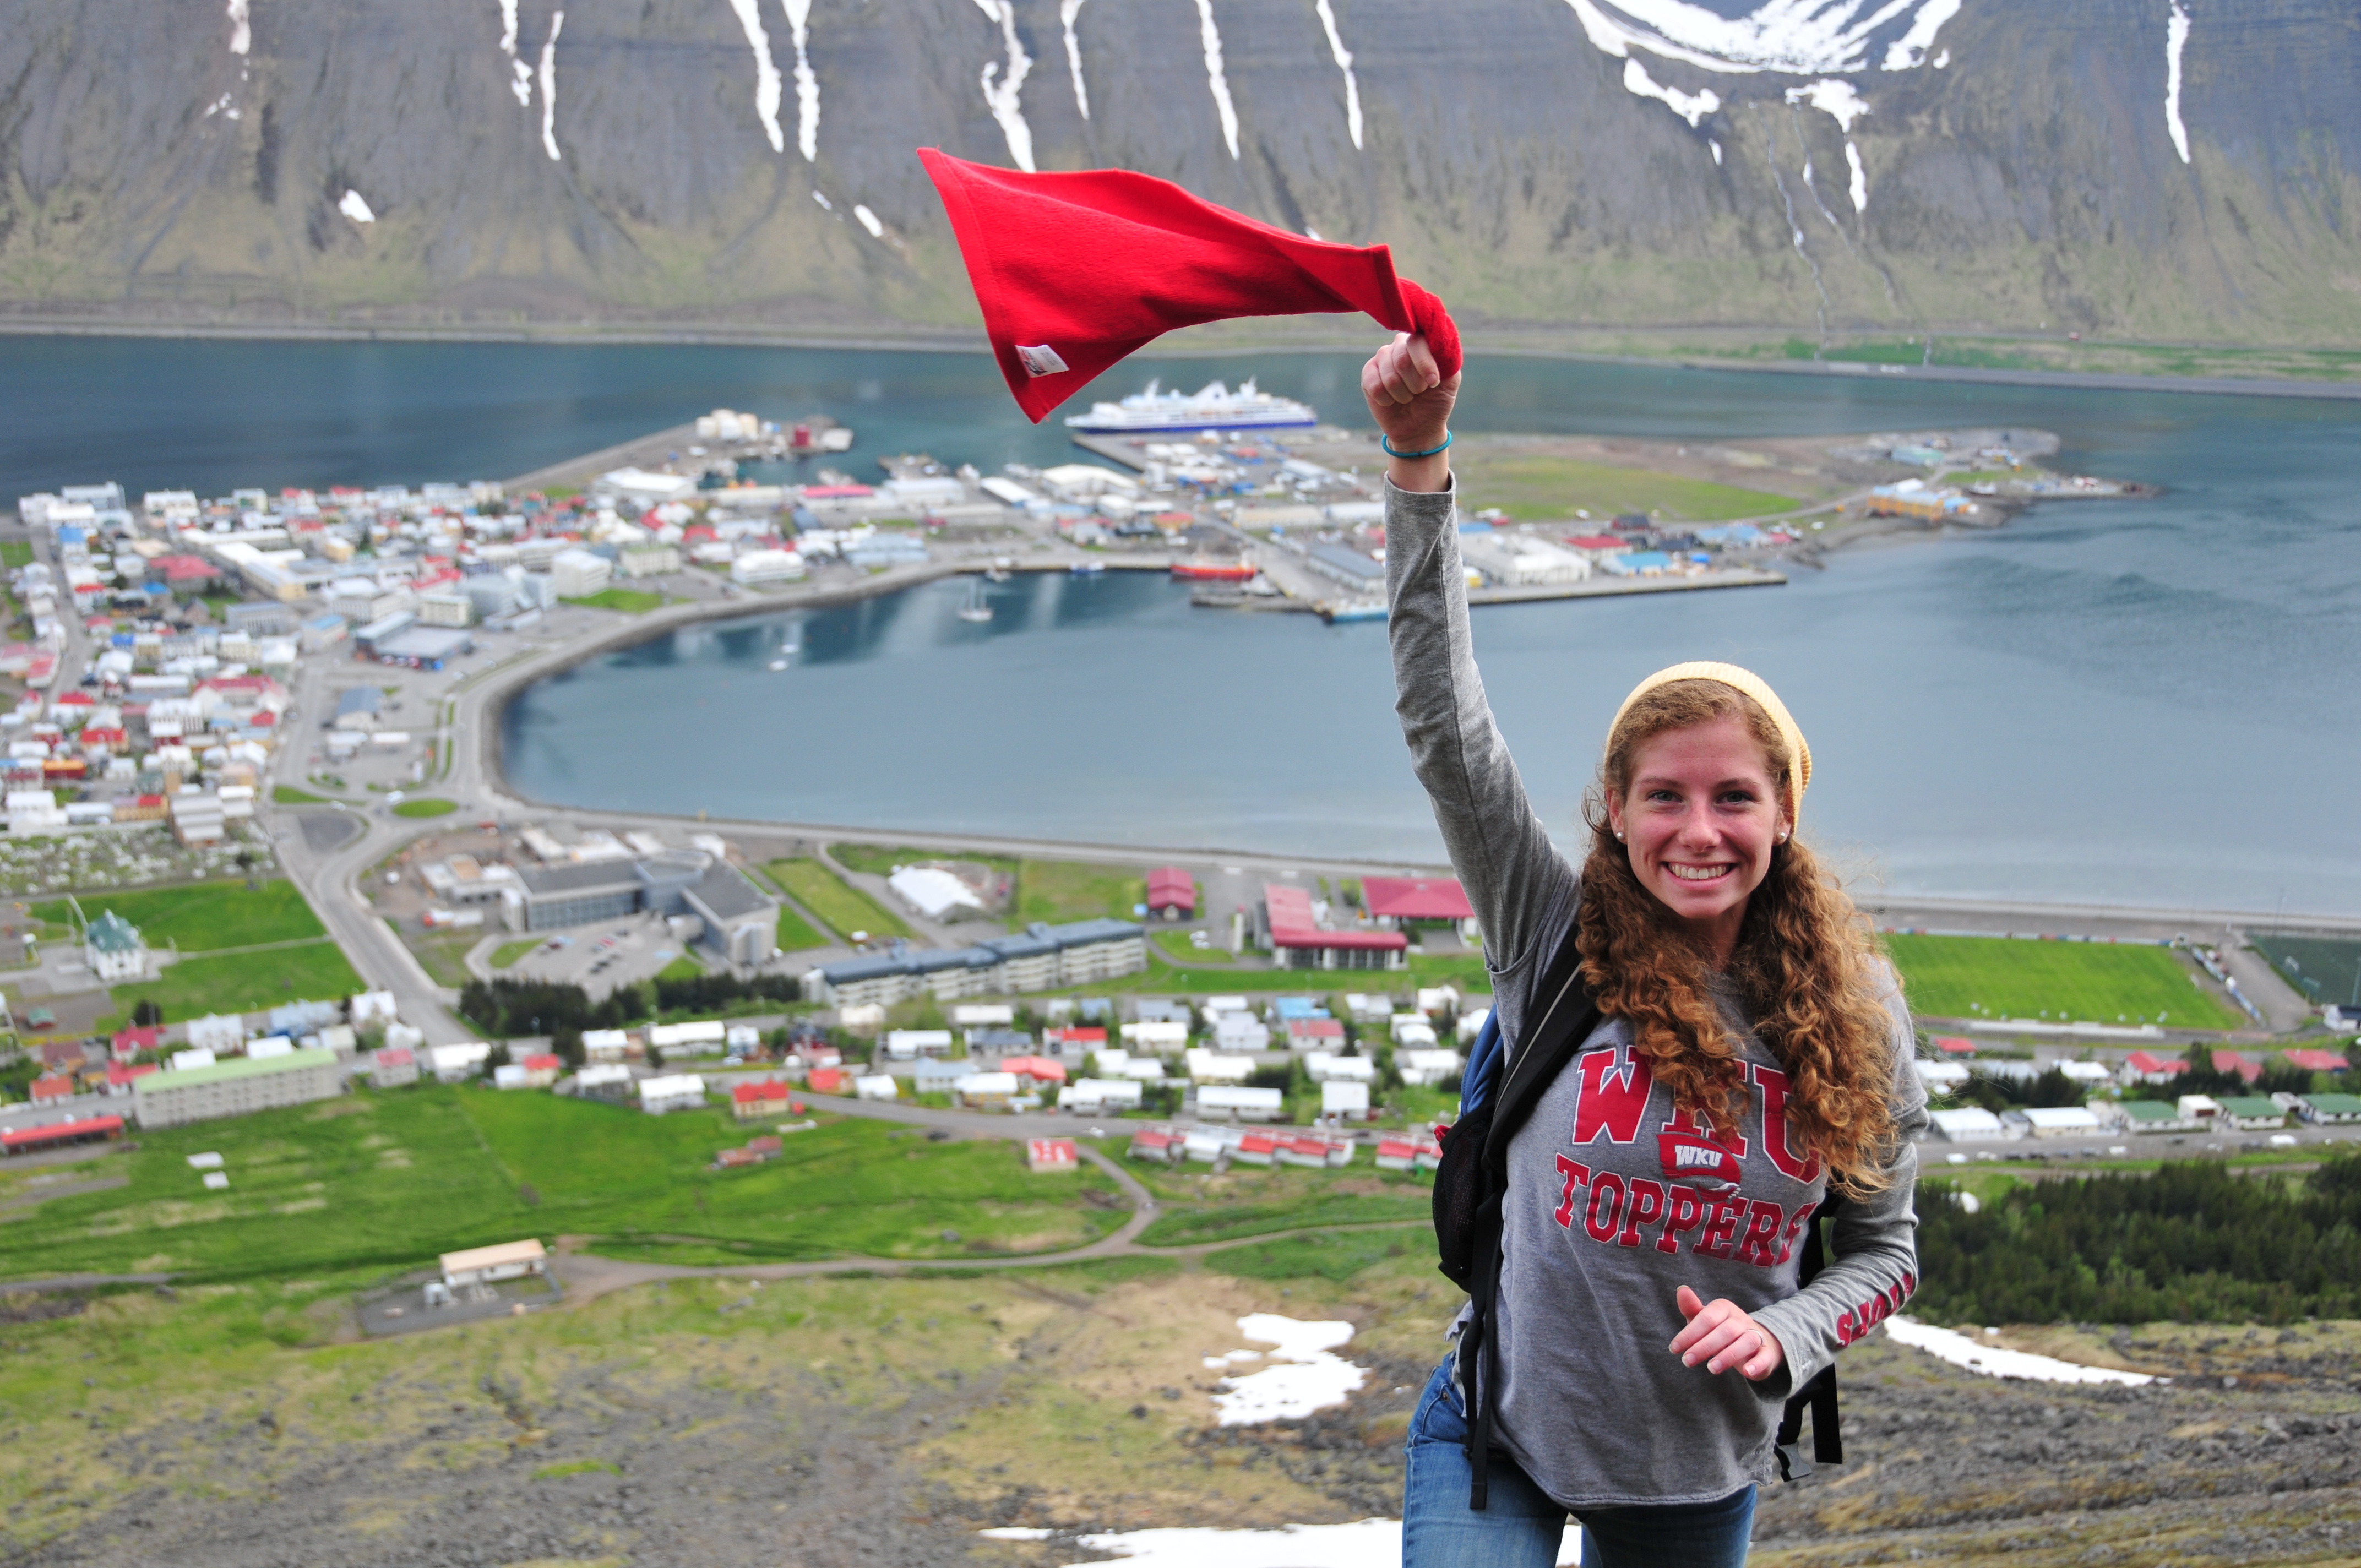 WKU student waves red towel while studying abroad.